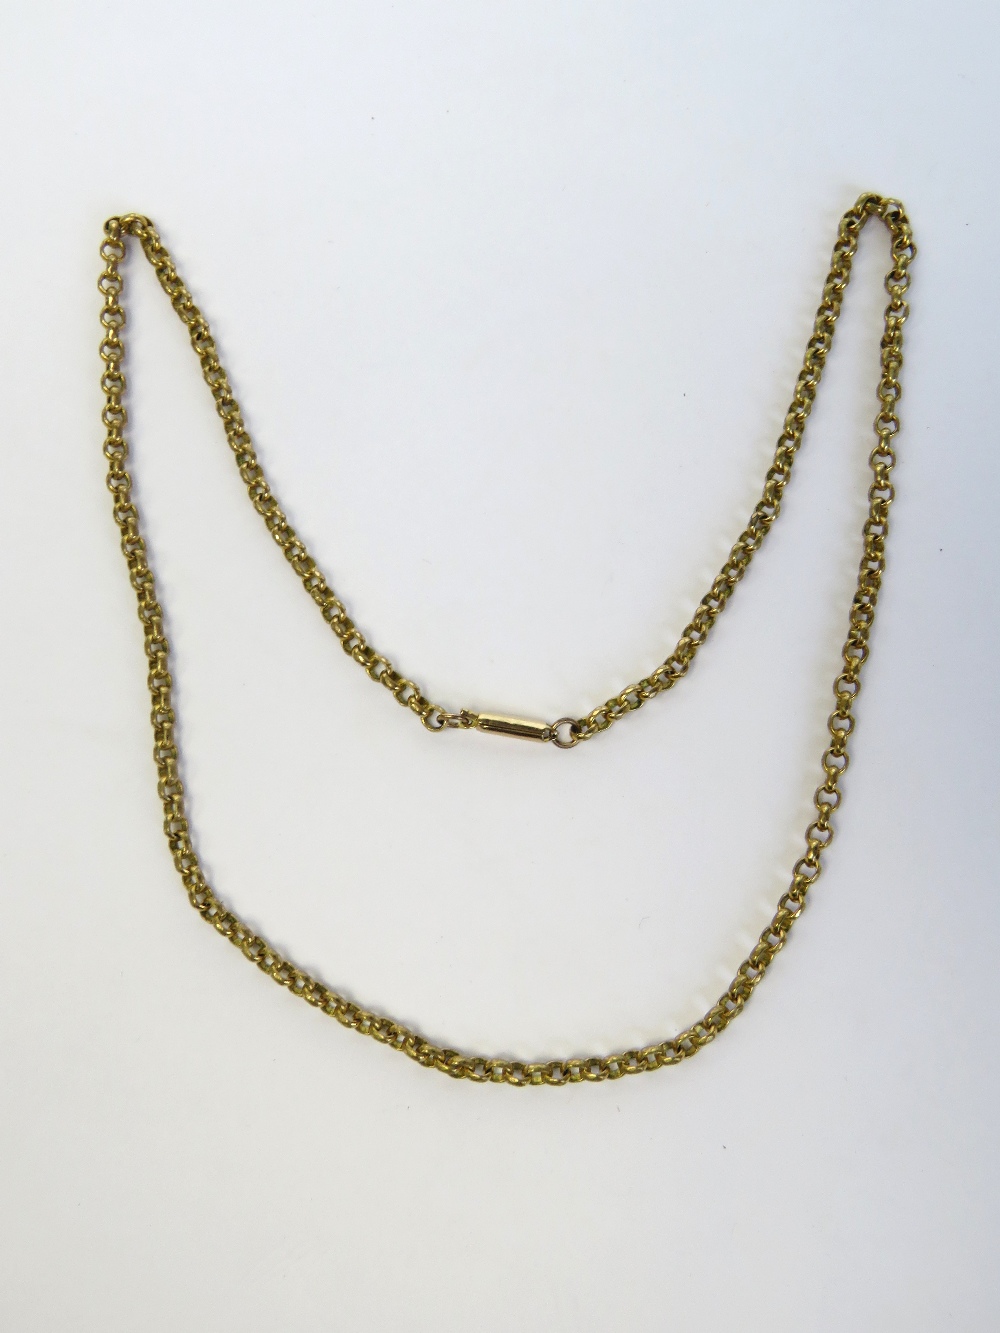 A heavy vintage 9ct gold belcher link chain necklace, stamped 9ct to the barrel clasp, - Image 3 of 3